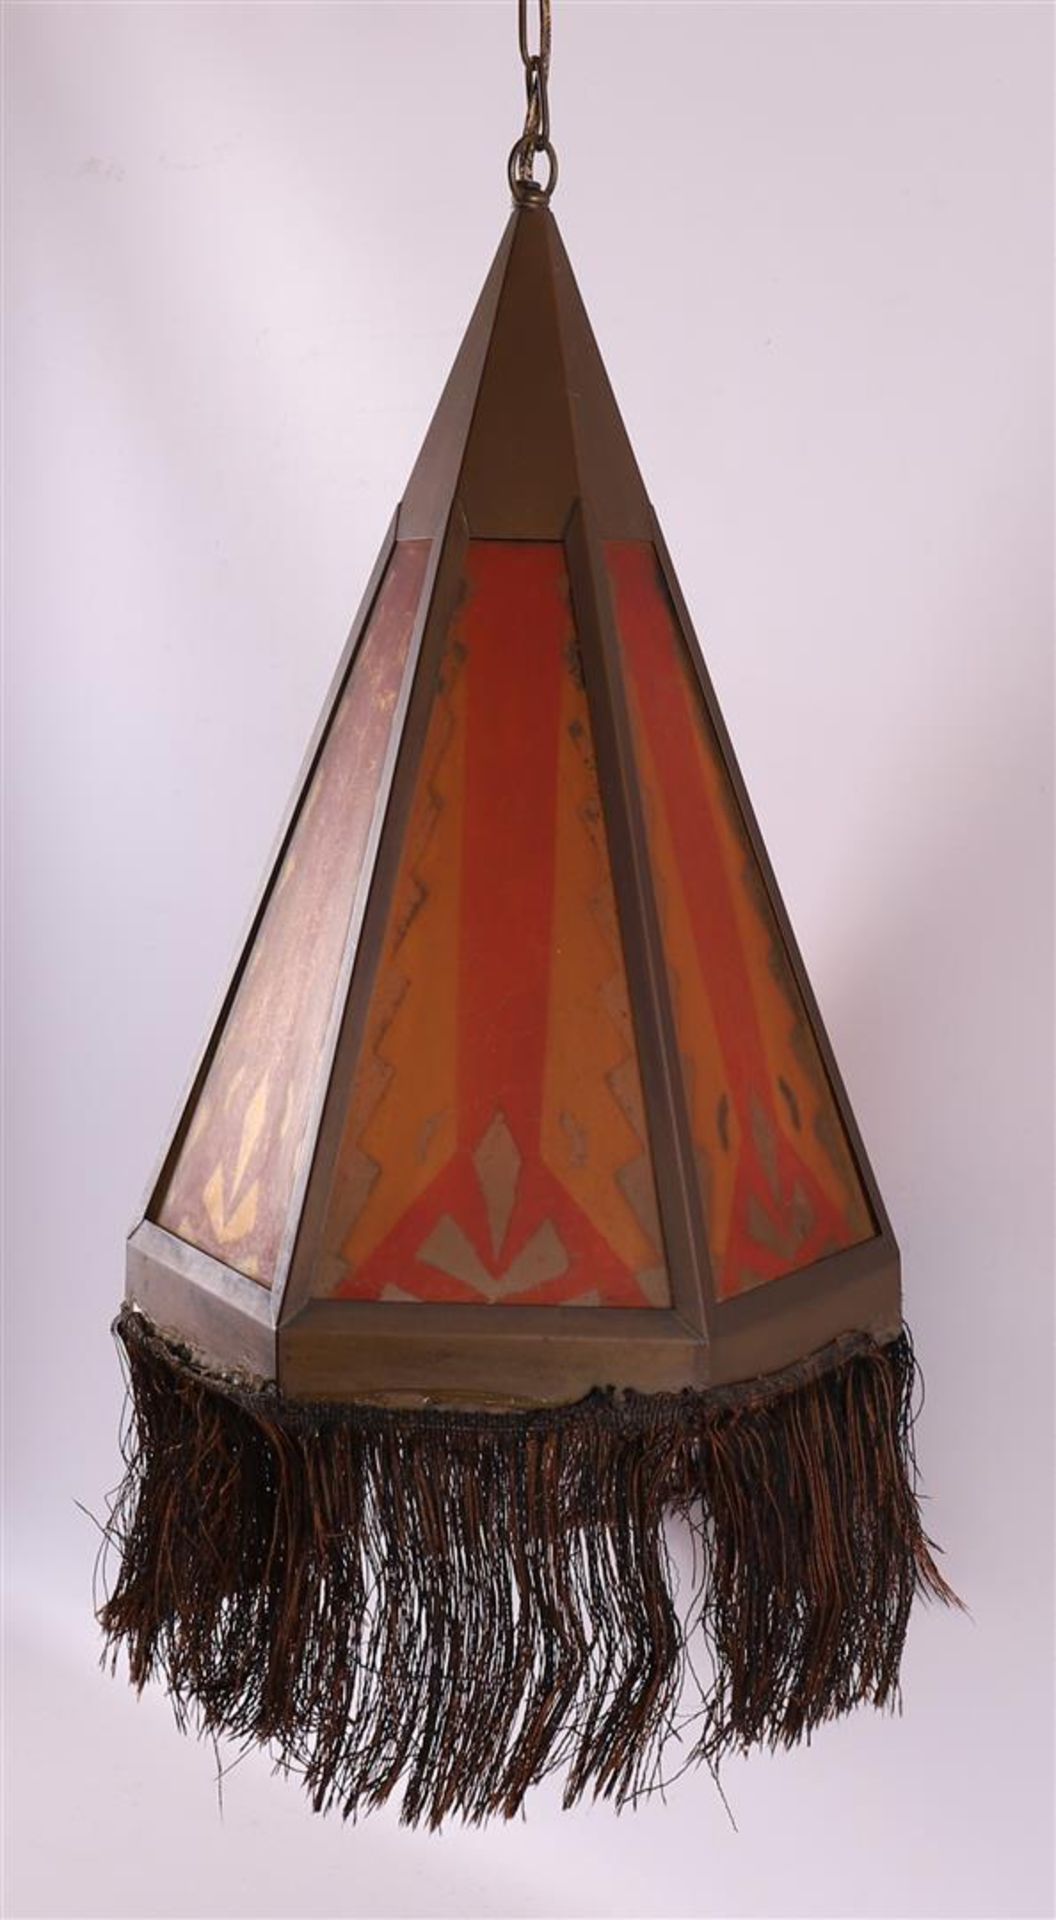 A conical glass-in-copper Amsterdam School hanging lamp with fringe, ca. 1910. - Image 2 of 4